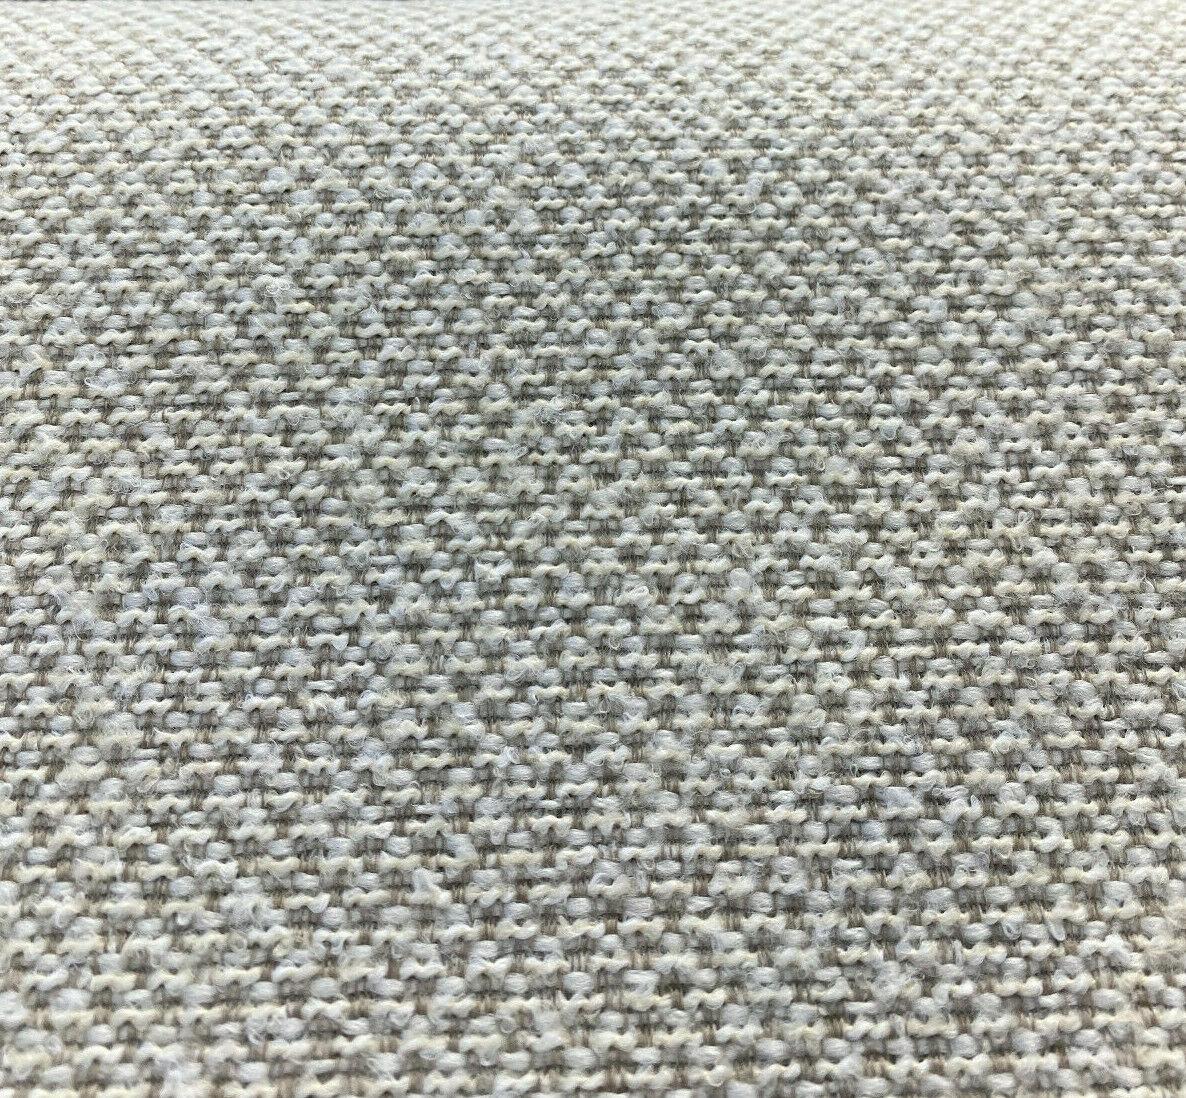 Mascot Bisque Cream Textured Chenille Upholstery Fabric By The Yard